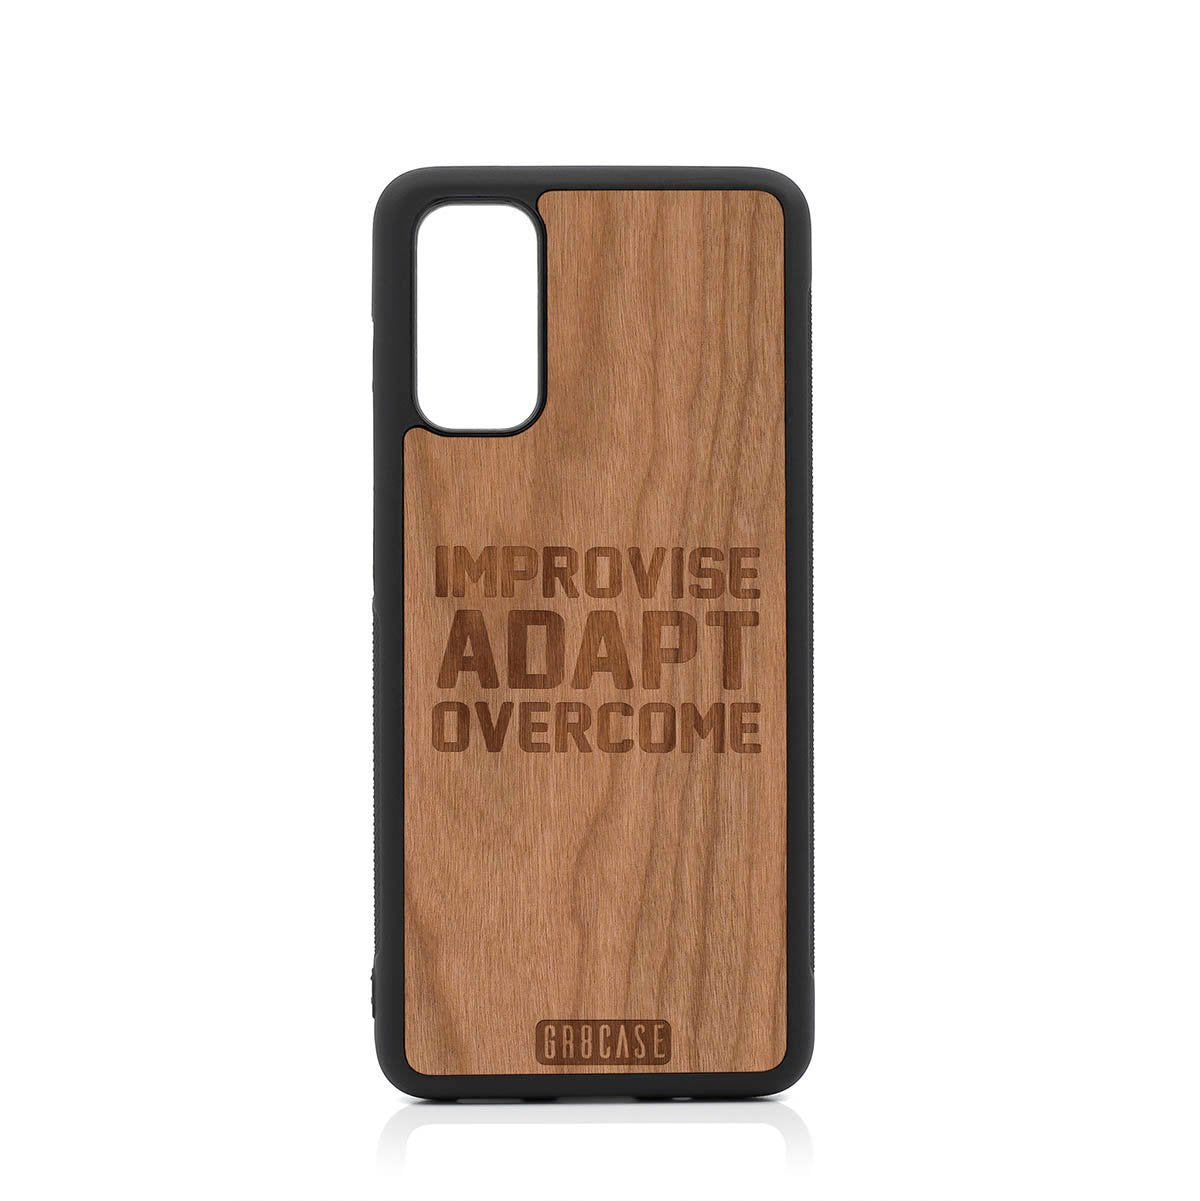 Improvise Adapt Overcome Design Wood Case For Samsung Galaxy S20 FE 5G